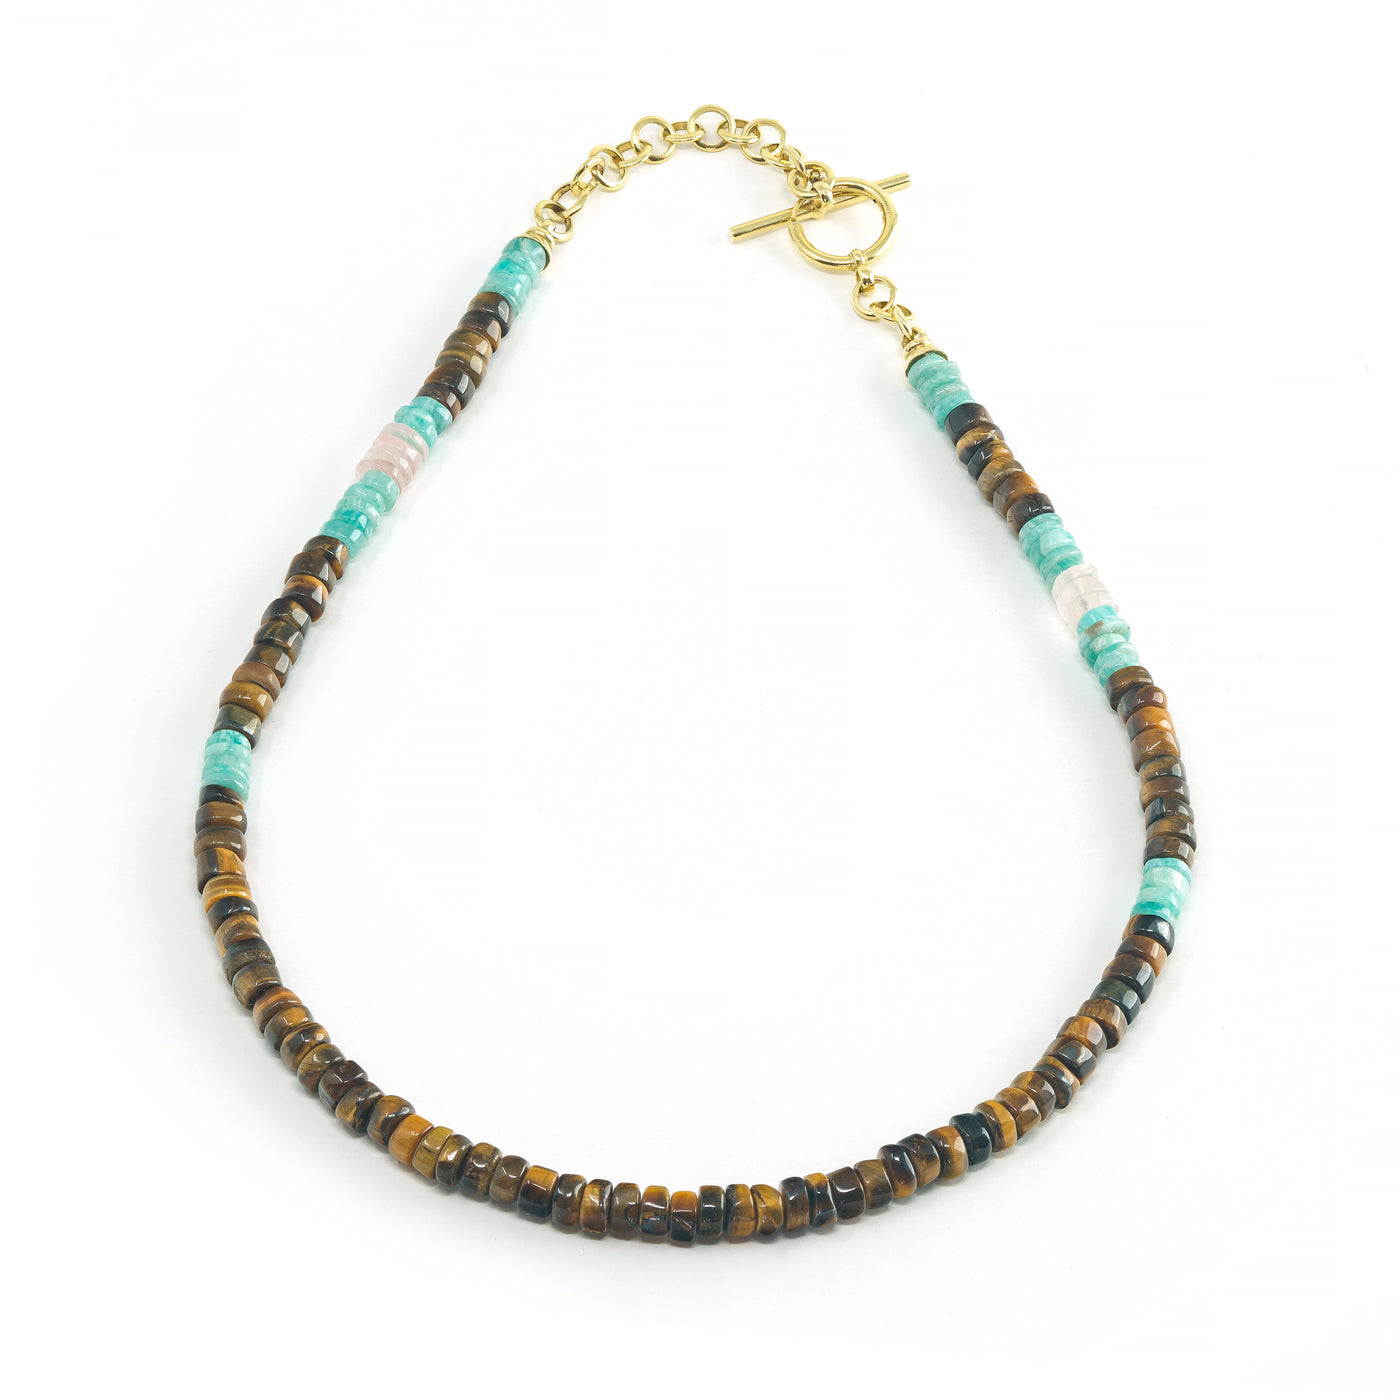 Tiger's Eye, Turquoise and Rose Quartz Heishi Beads with Toggle